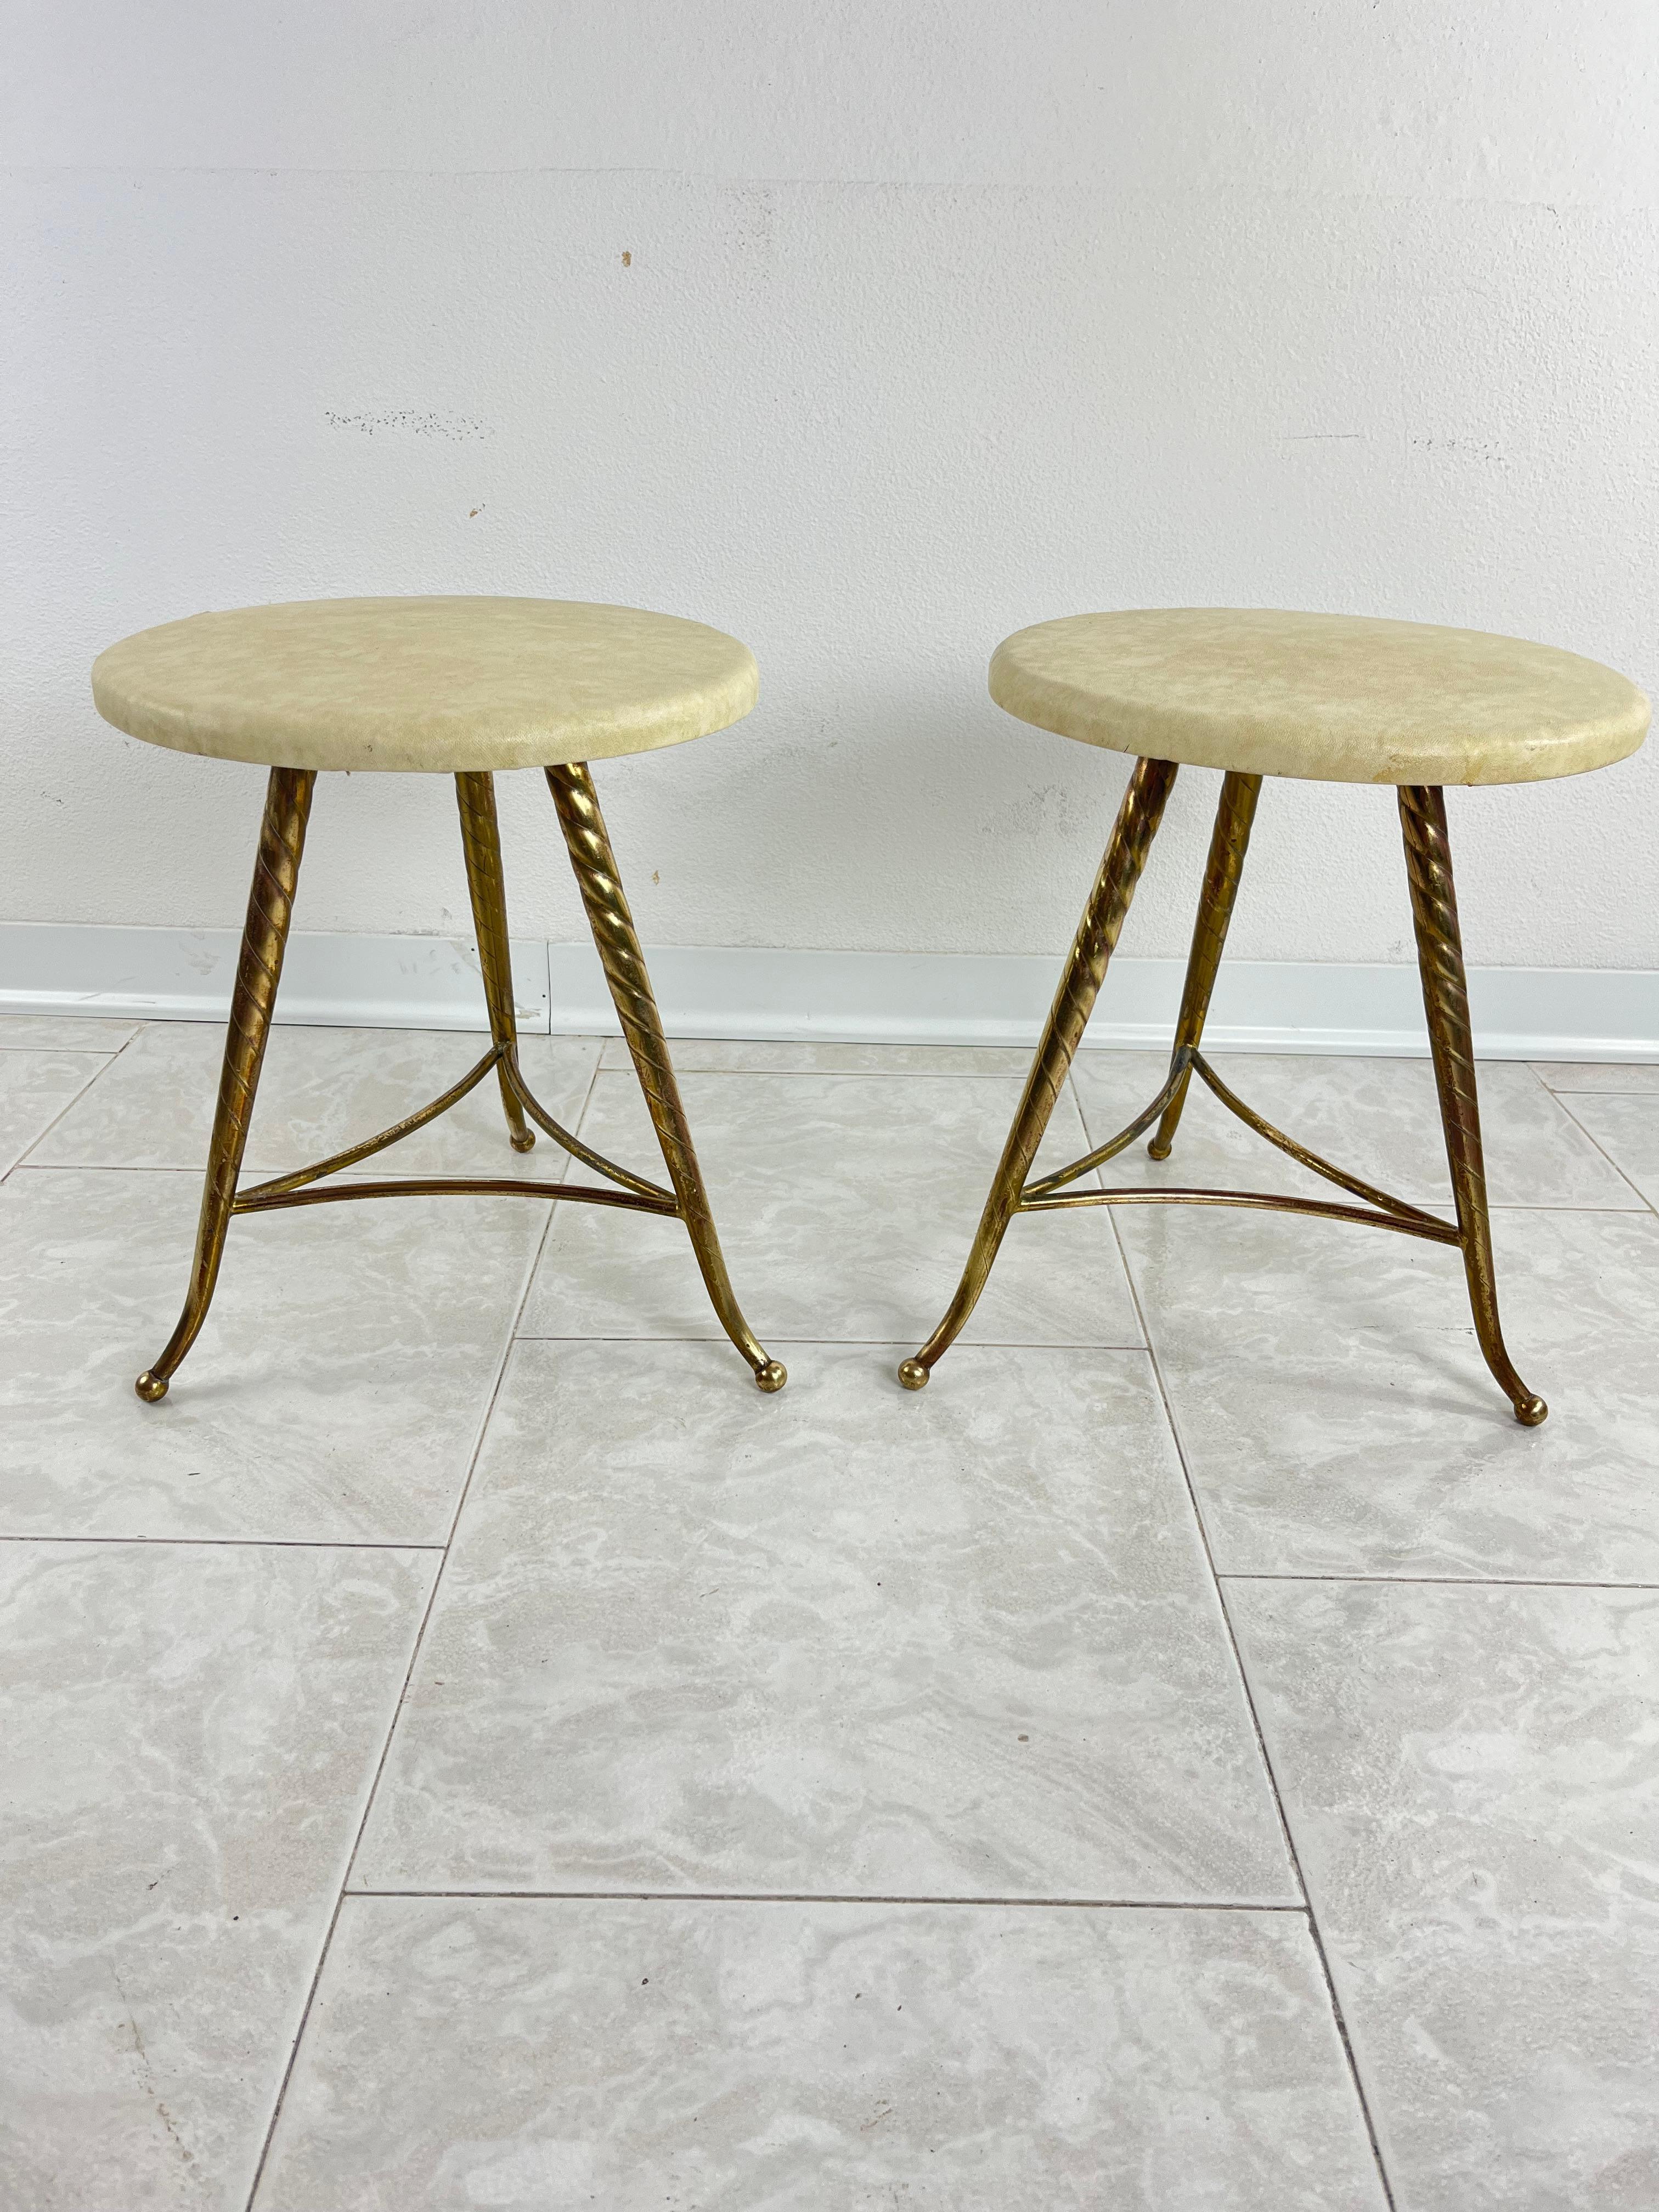 Set of 2 Mid-Century brass stools attributed to Paolo Buffa 1950s
Intact and in good condition, small signs of aging.